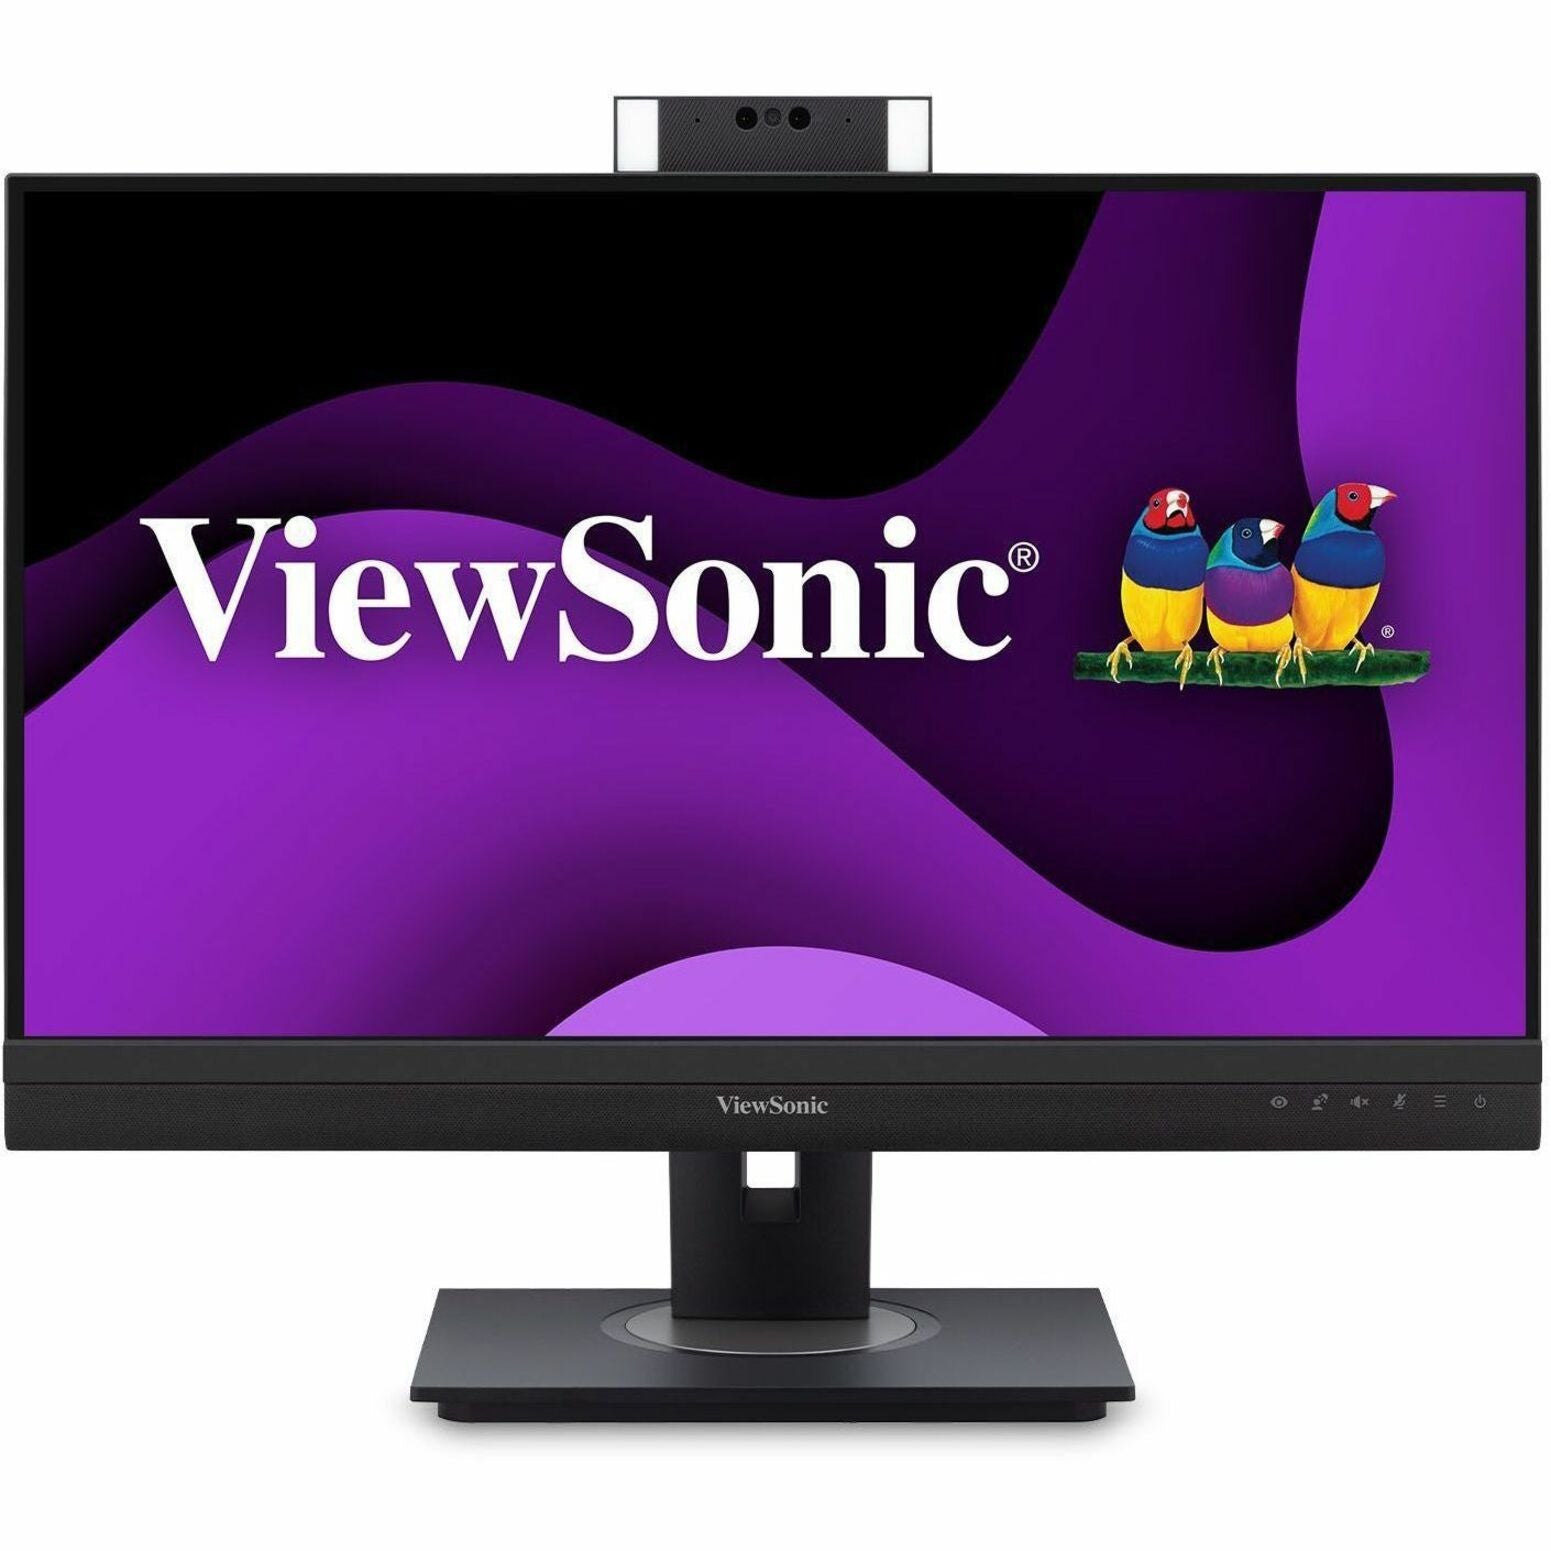 ViewSonic 27IN 1440P VIDEO CONFERENCING MONITOR WITH WINDOWS HELLO COMPATIBLE IR WEBCAM, 9 (VG2757V-2K)